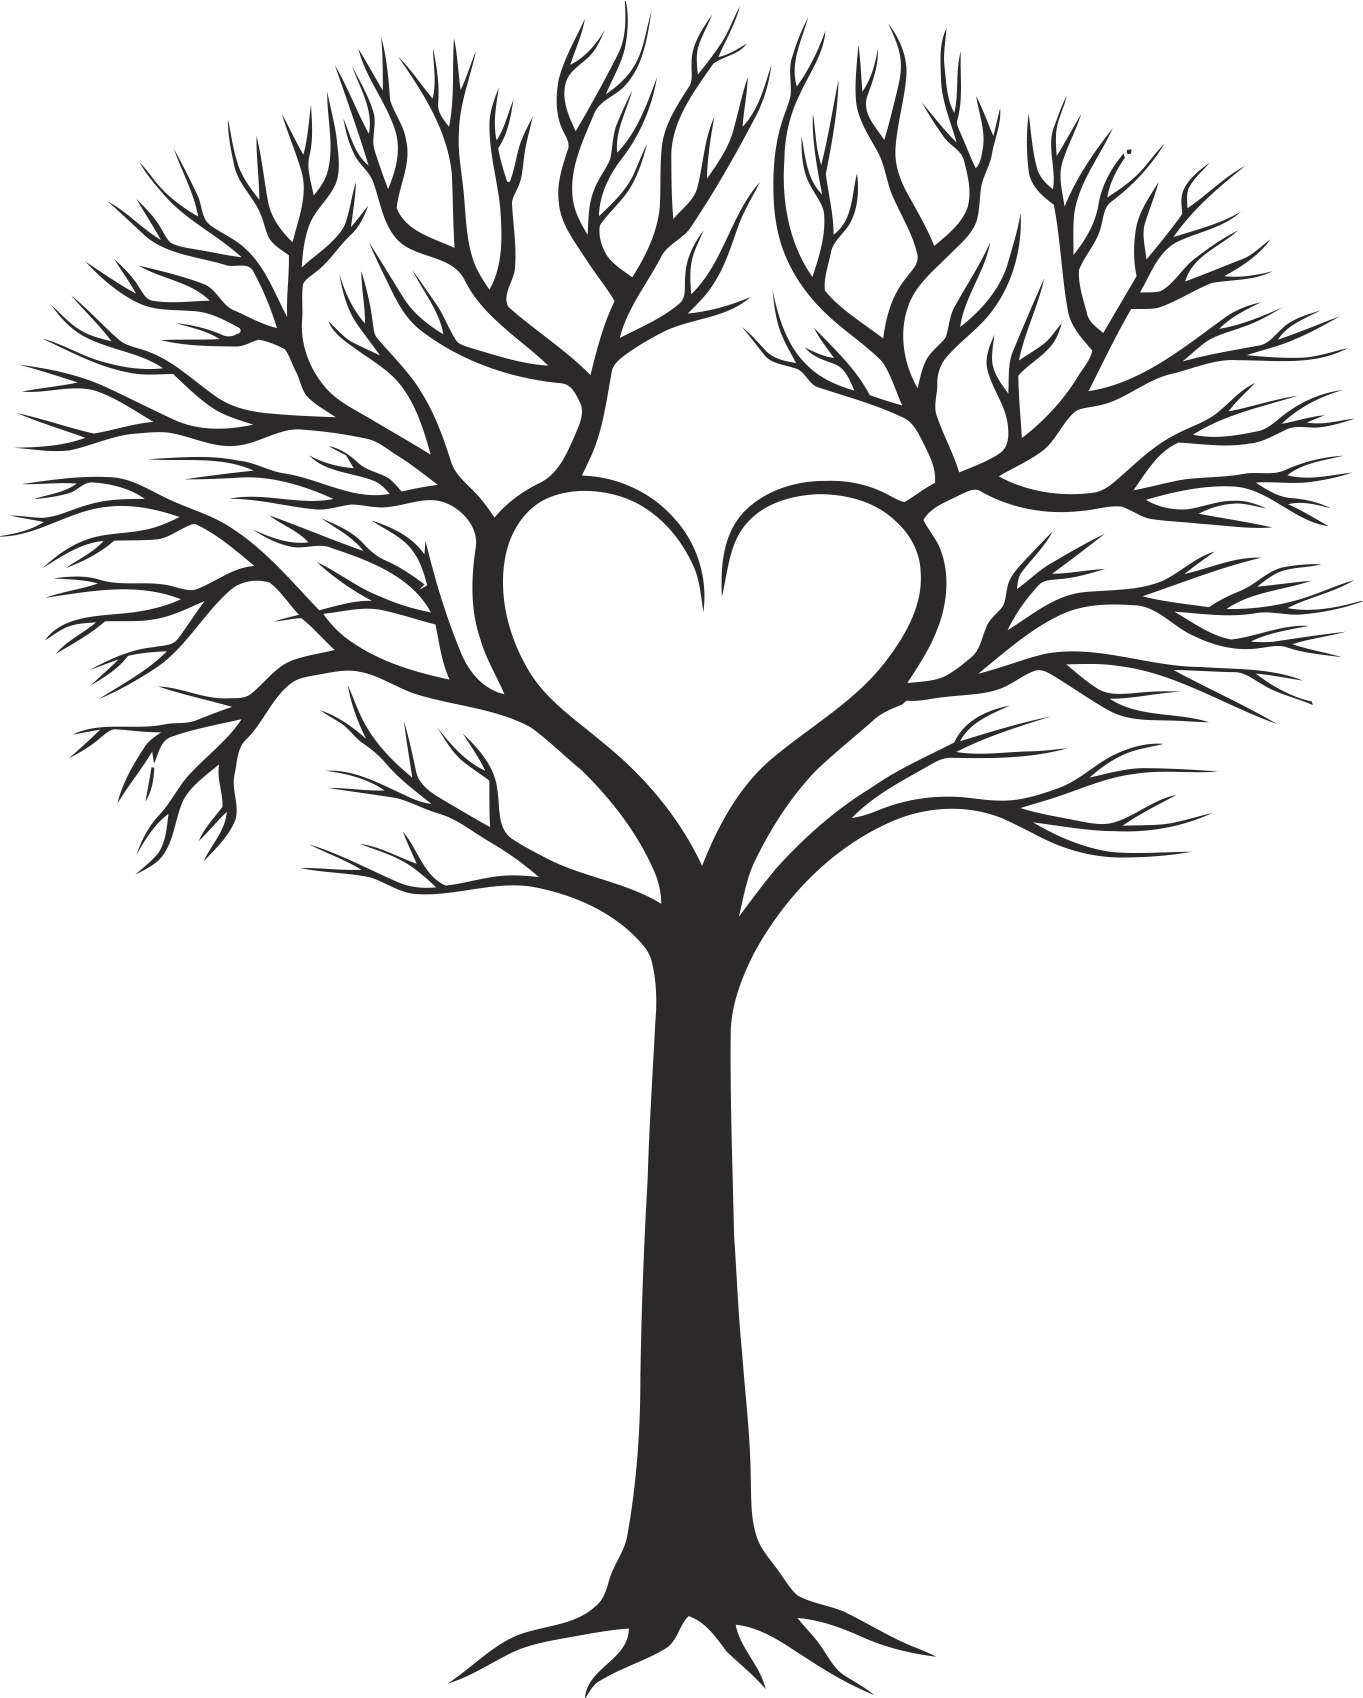 Download Family Tree Silhouette Vector at Vectorified.com | Collection of Family Tree Silhouette Vector ...